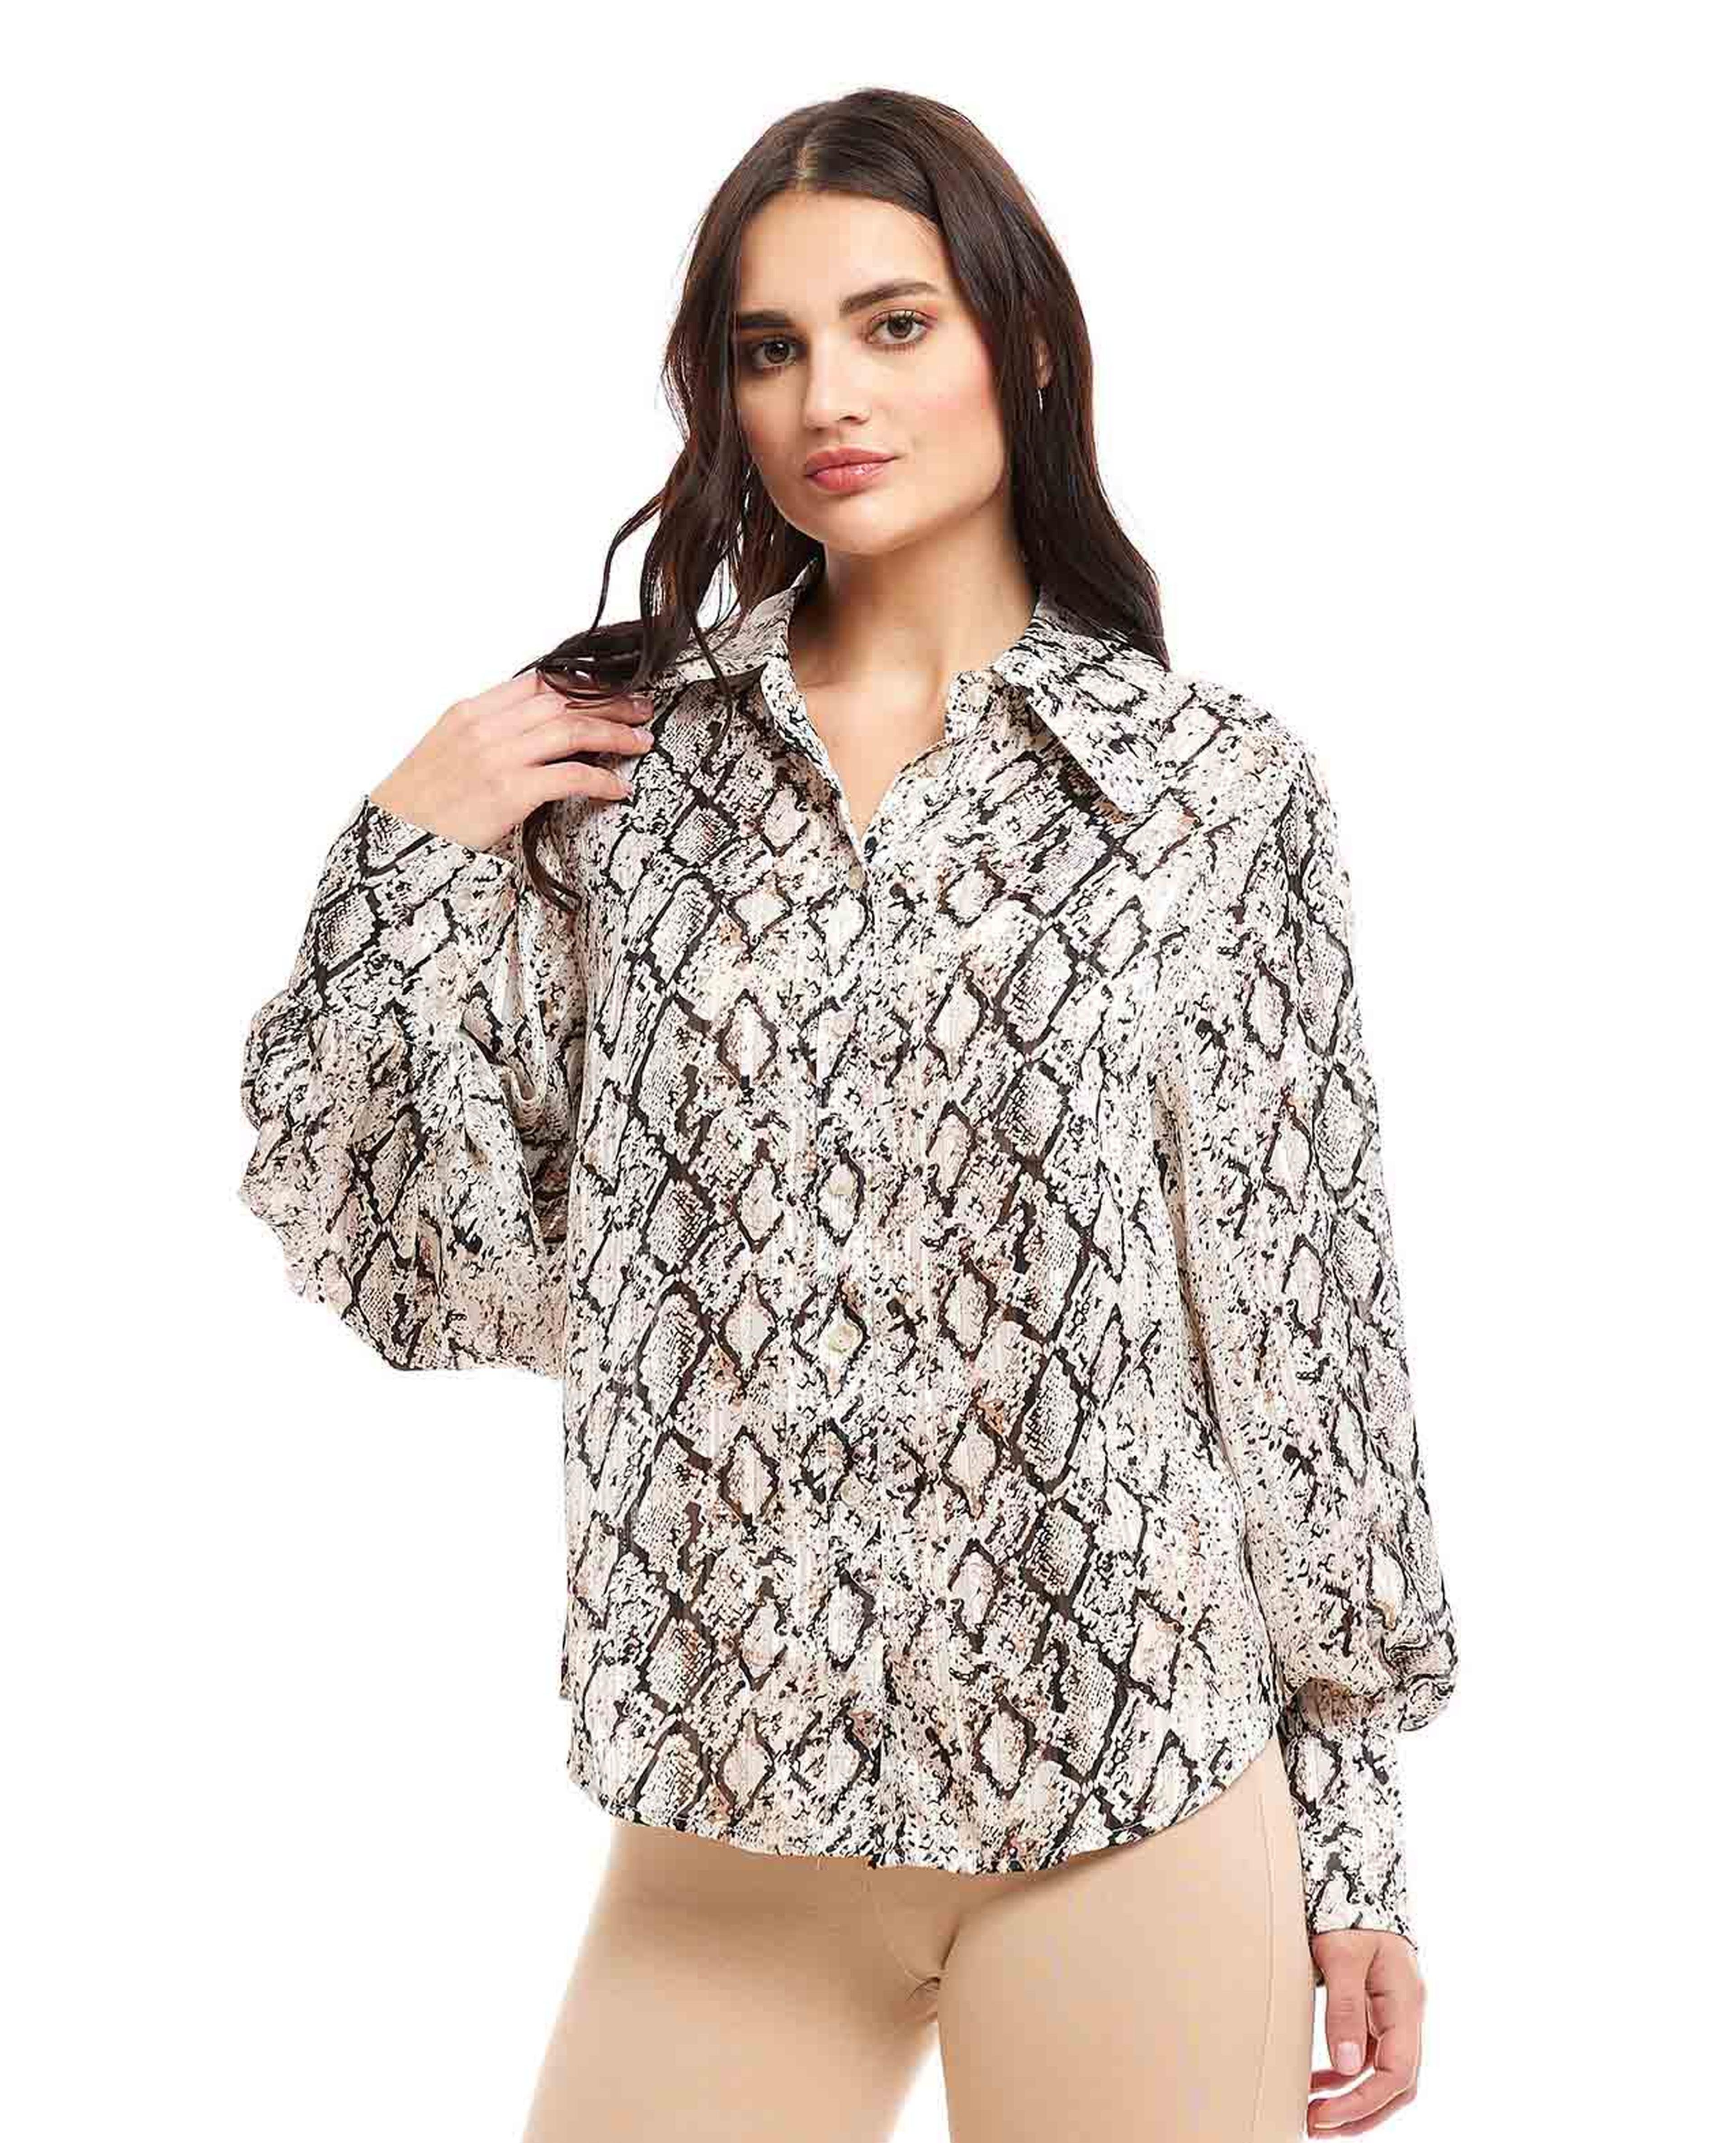 Snakeskin Shirt with Spread Collar and Bishop Sleeves